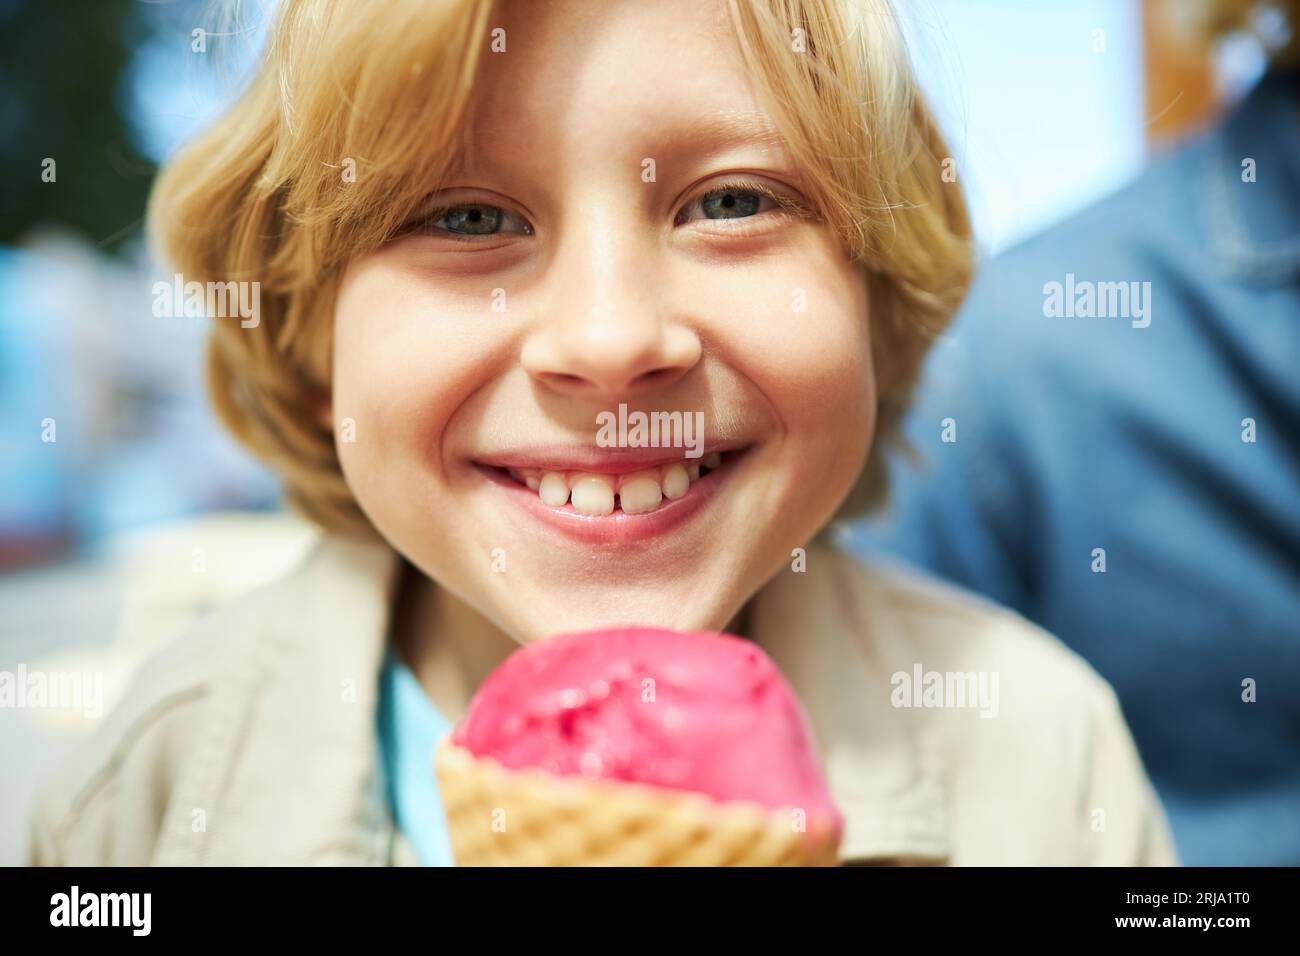 Close up of happy boy eating ice cream cone outdoors at carnival and smiling at camera Stock Photo